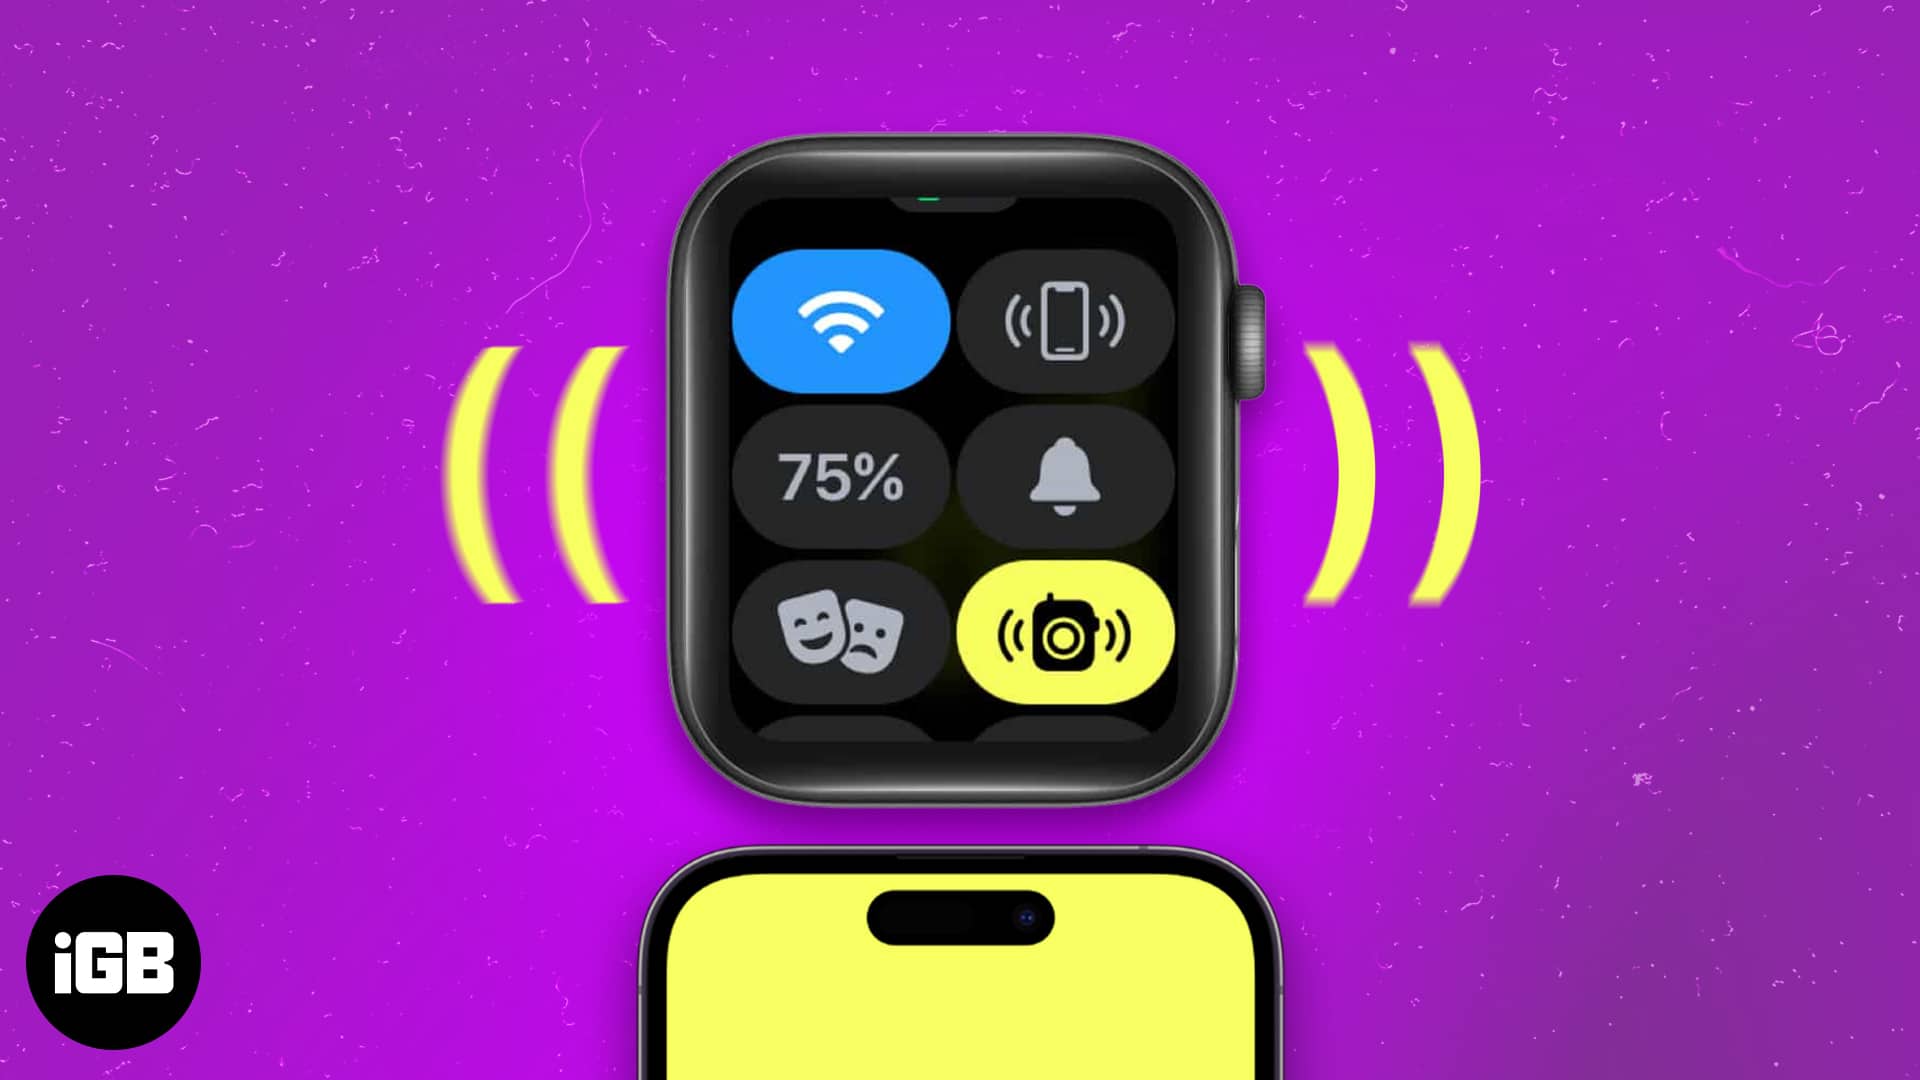 How to ping Apple Watch from iPhone with iOS 17 and vice versa